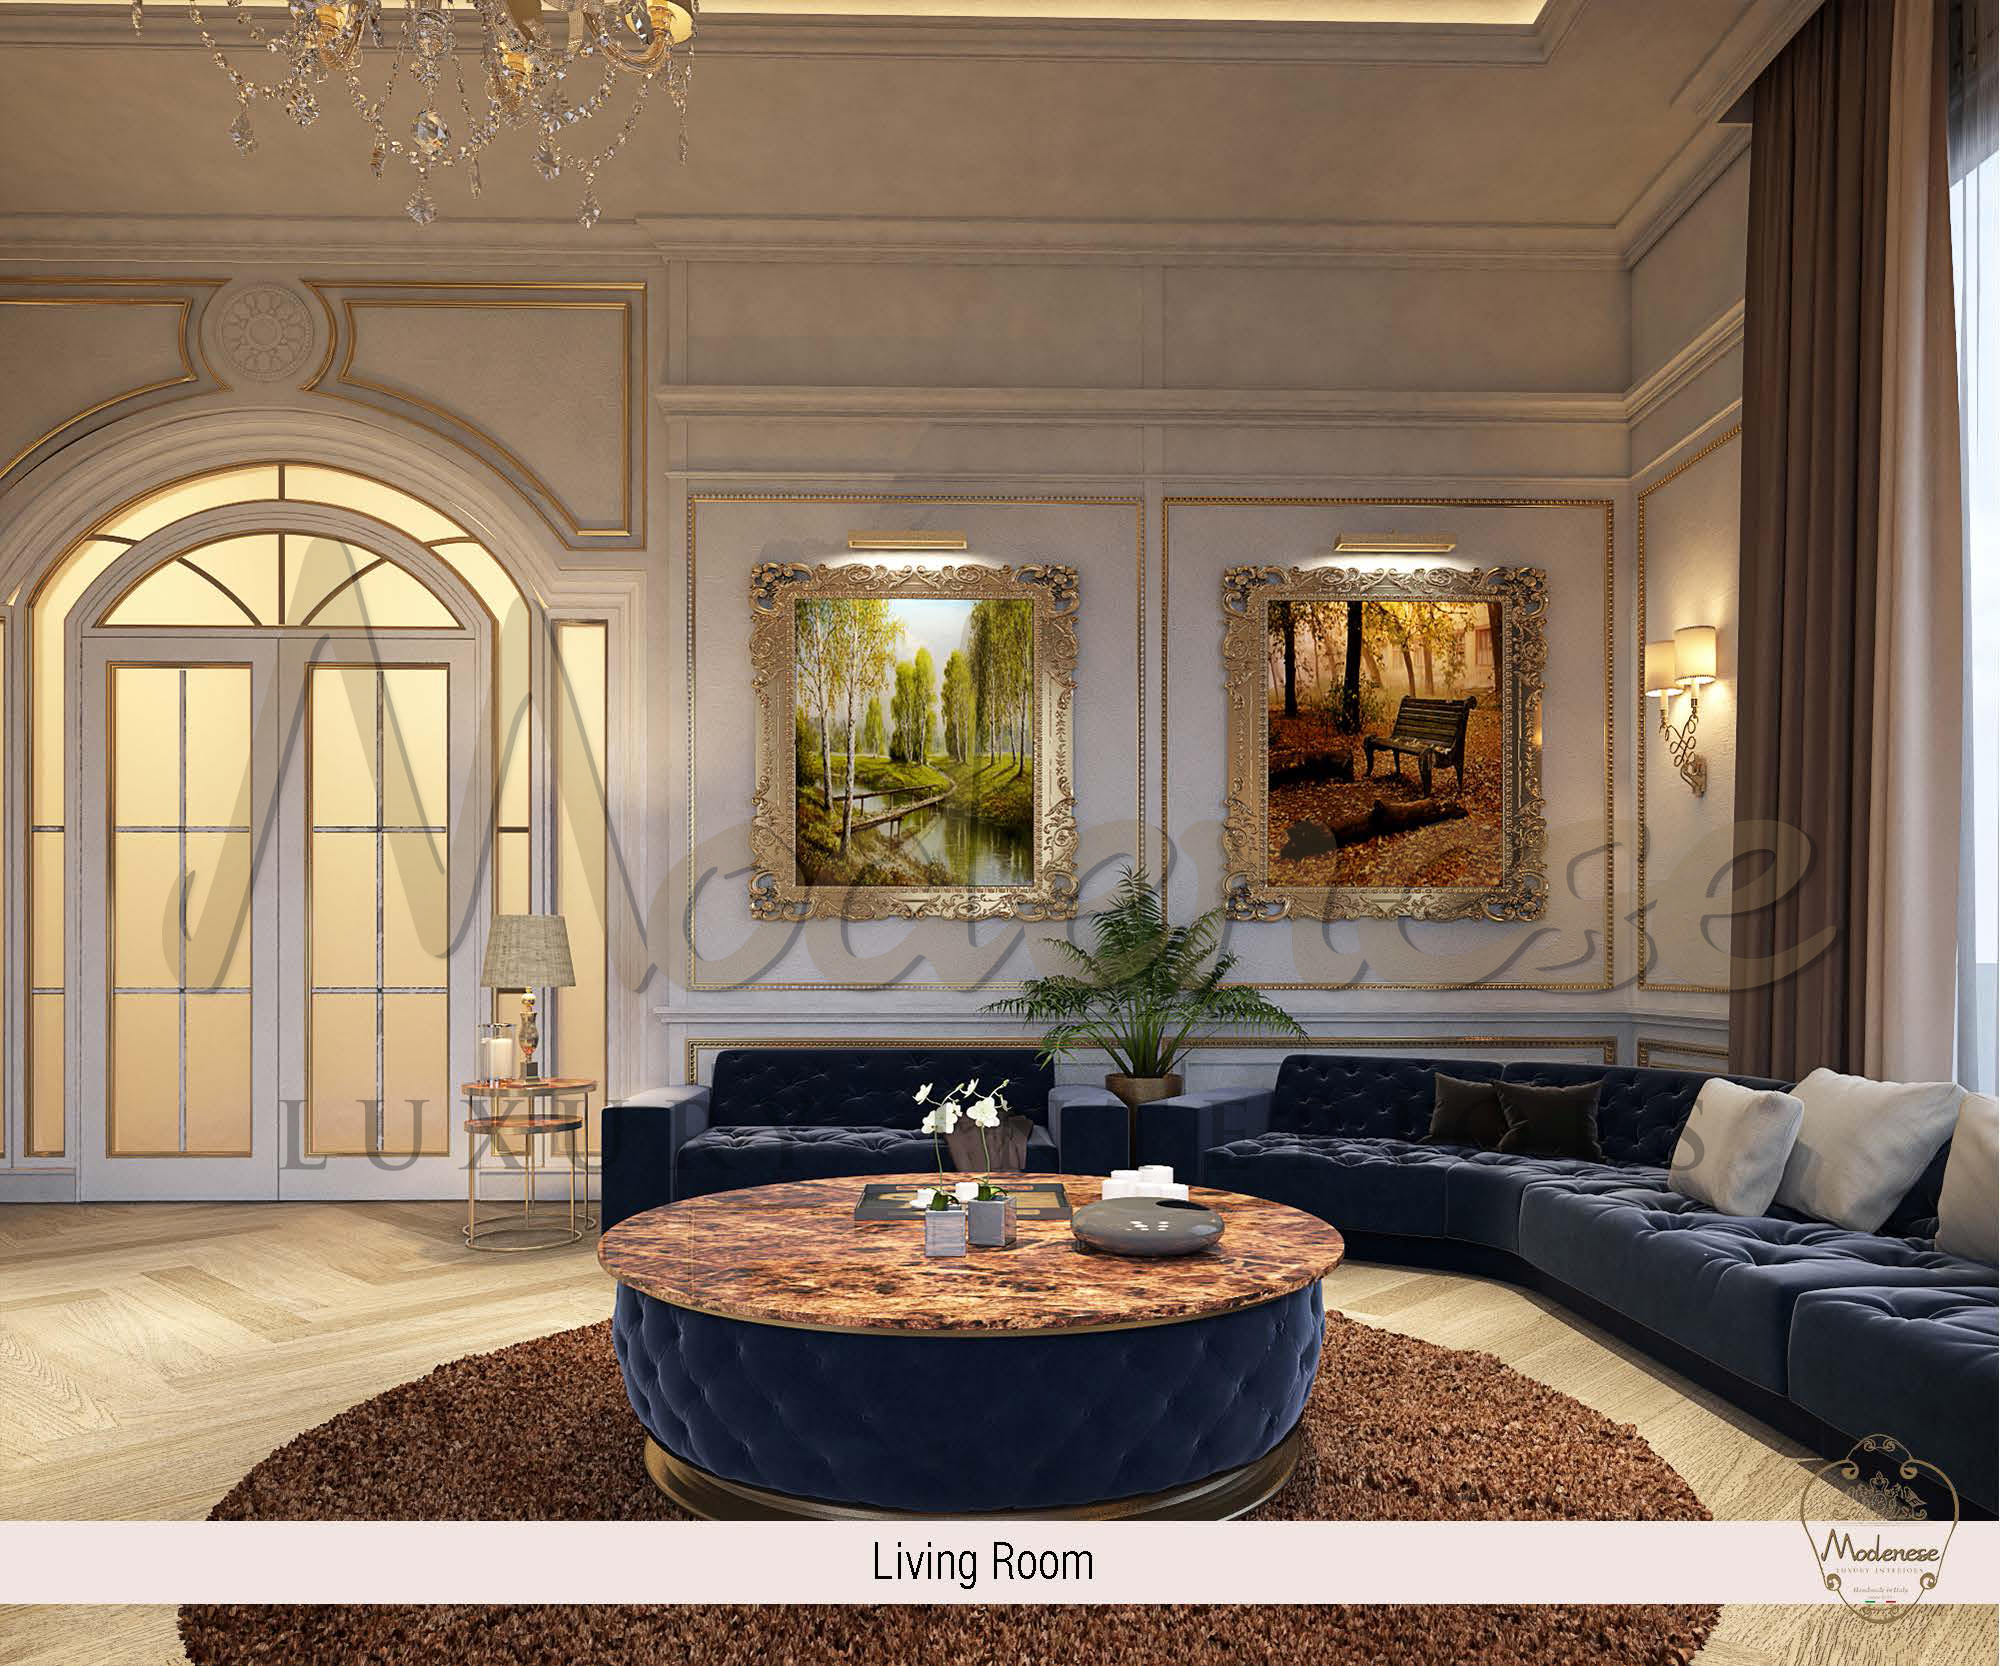 Elegant interiors, unique design for luxurious bespoke mansion. High-end materials and best quality furniture made in Italy